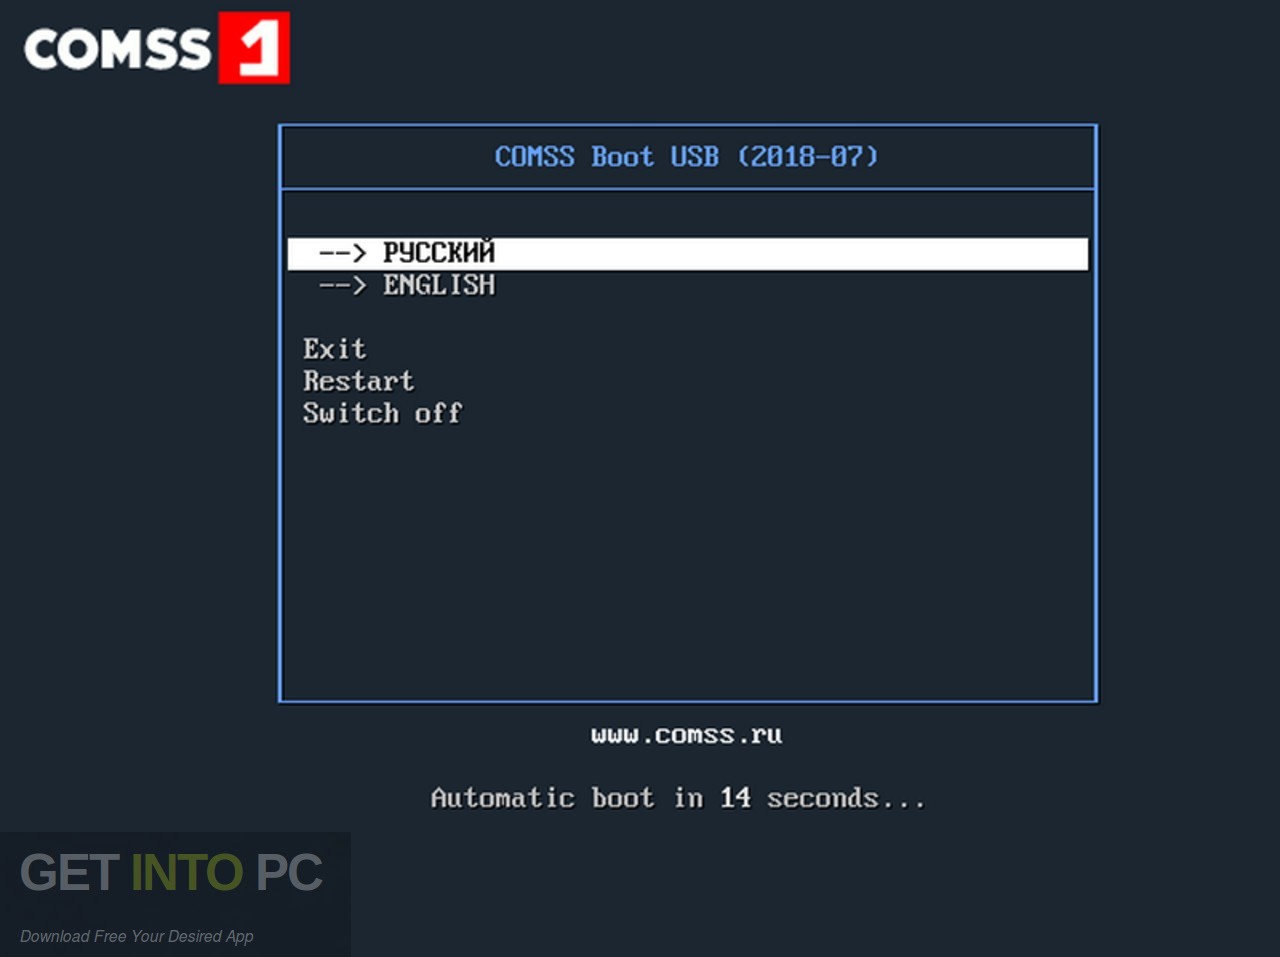 COMSS Boot USB 2019 Direct Link Download